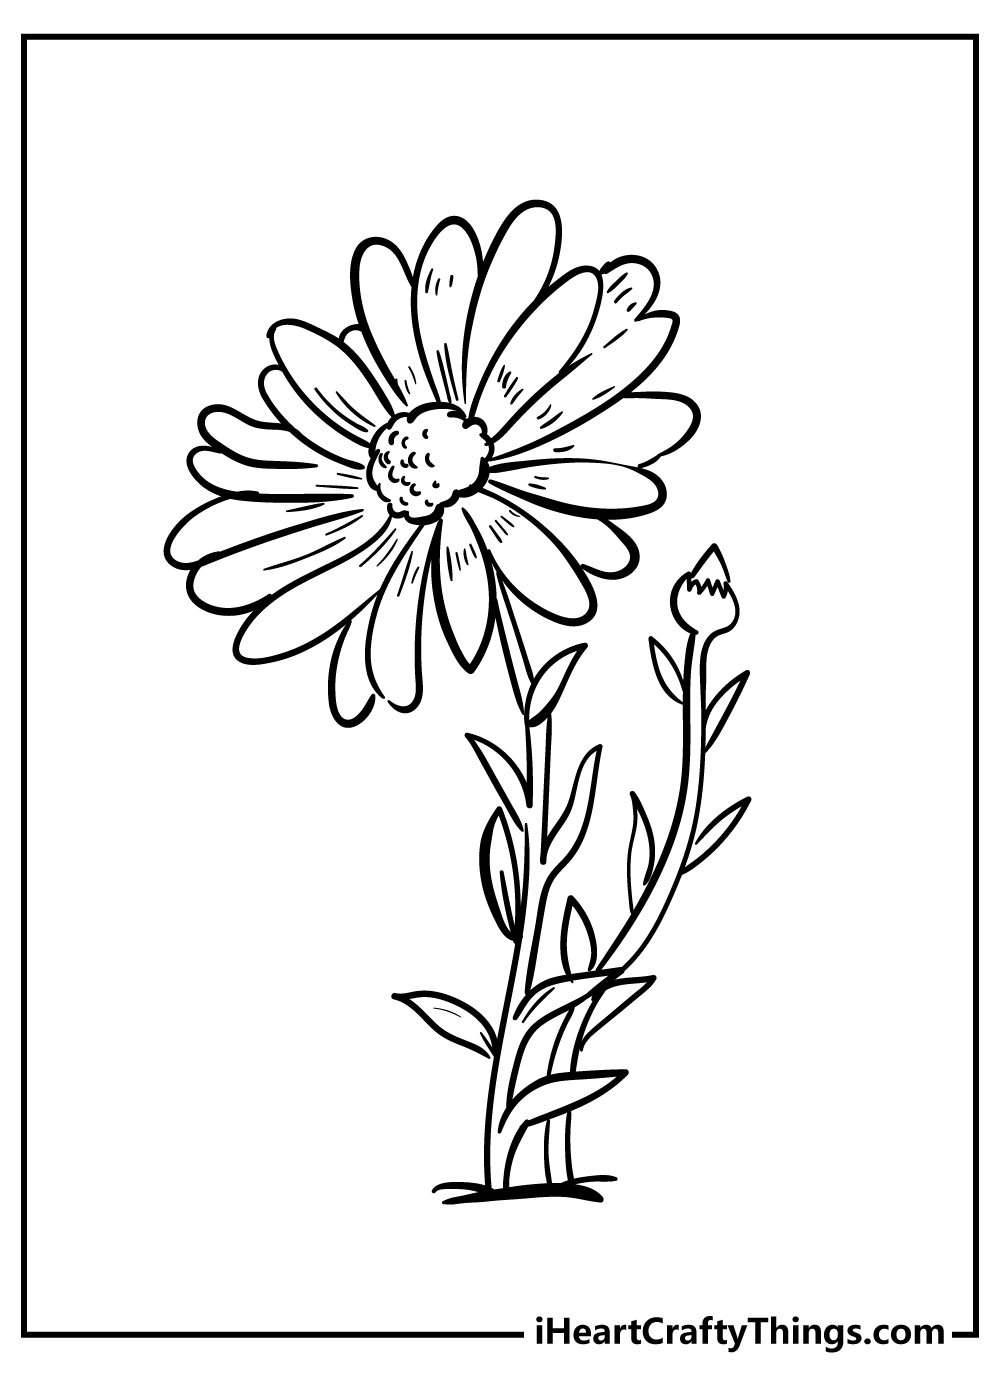 Daisy Coloring Book for kids free printable